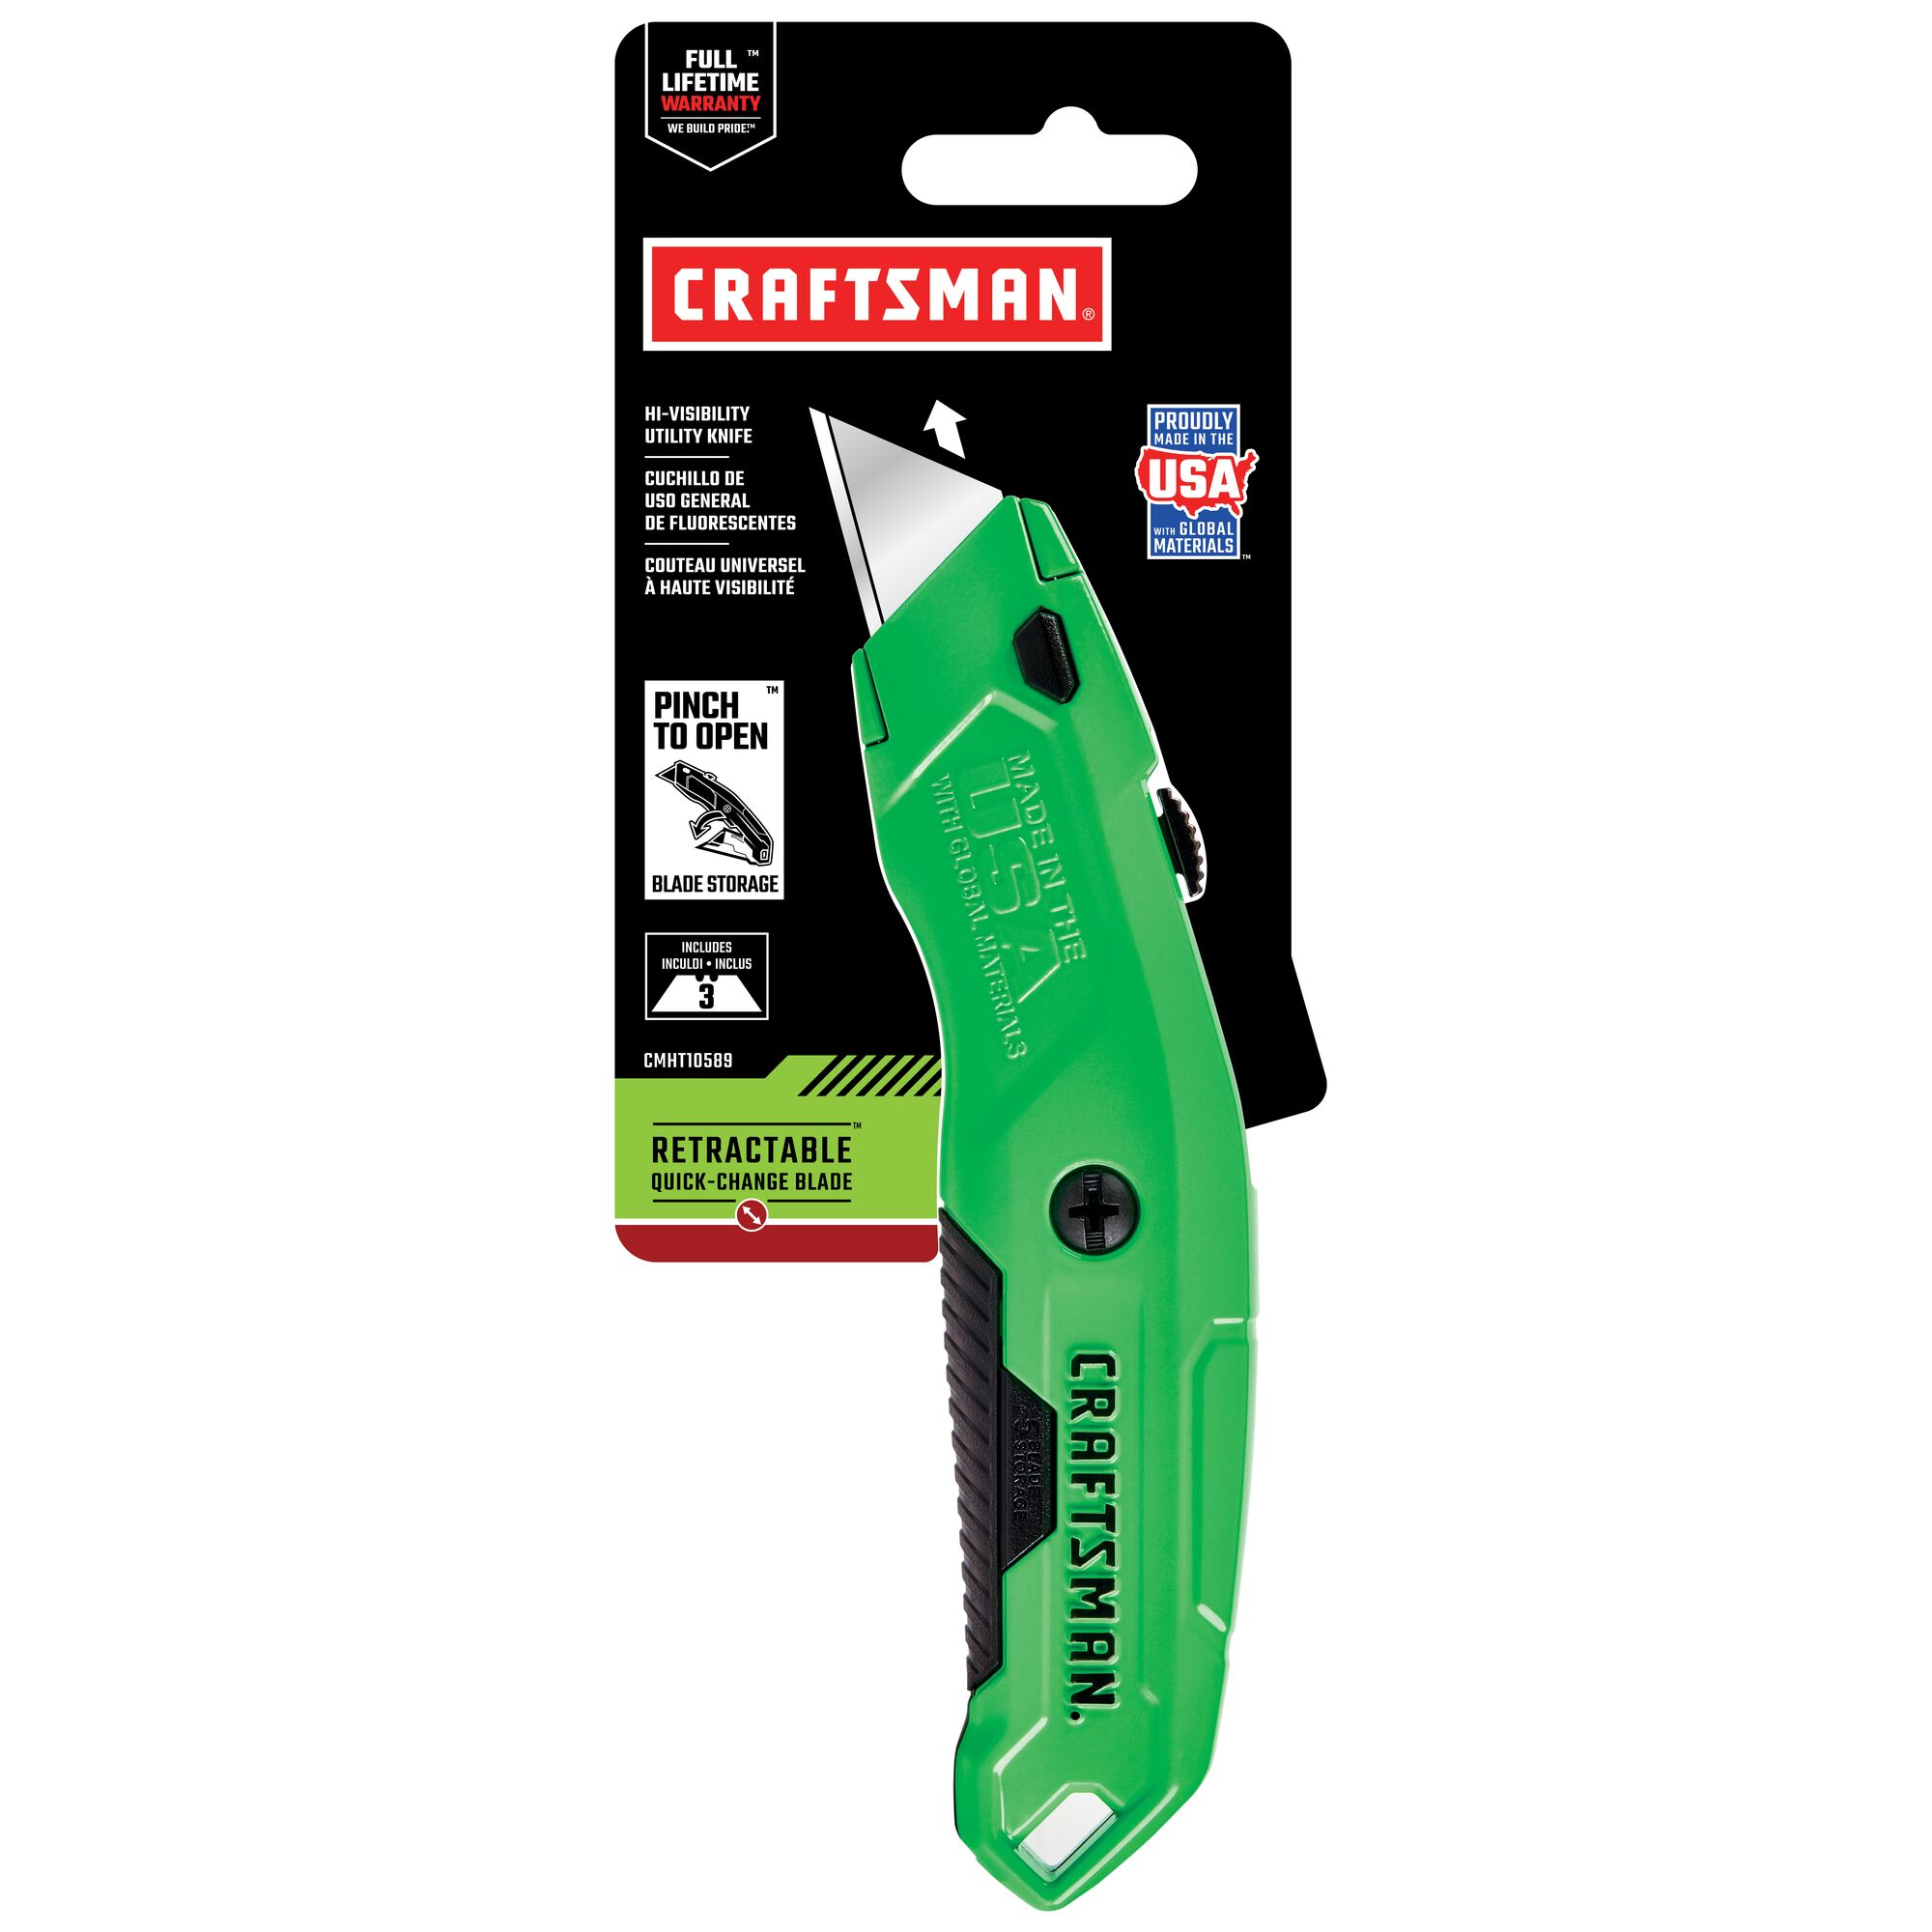 High visibility quick change utility knife in plastic packaging.